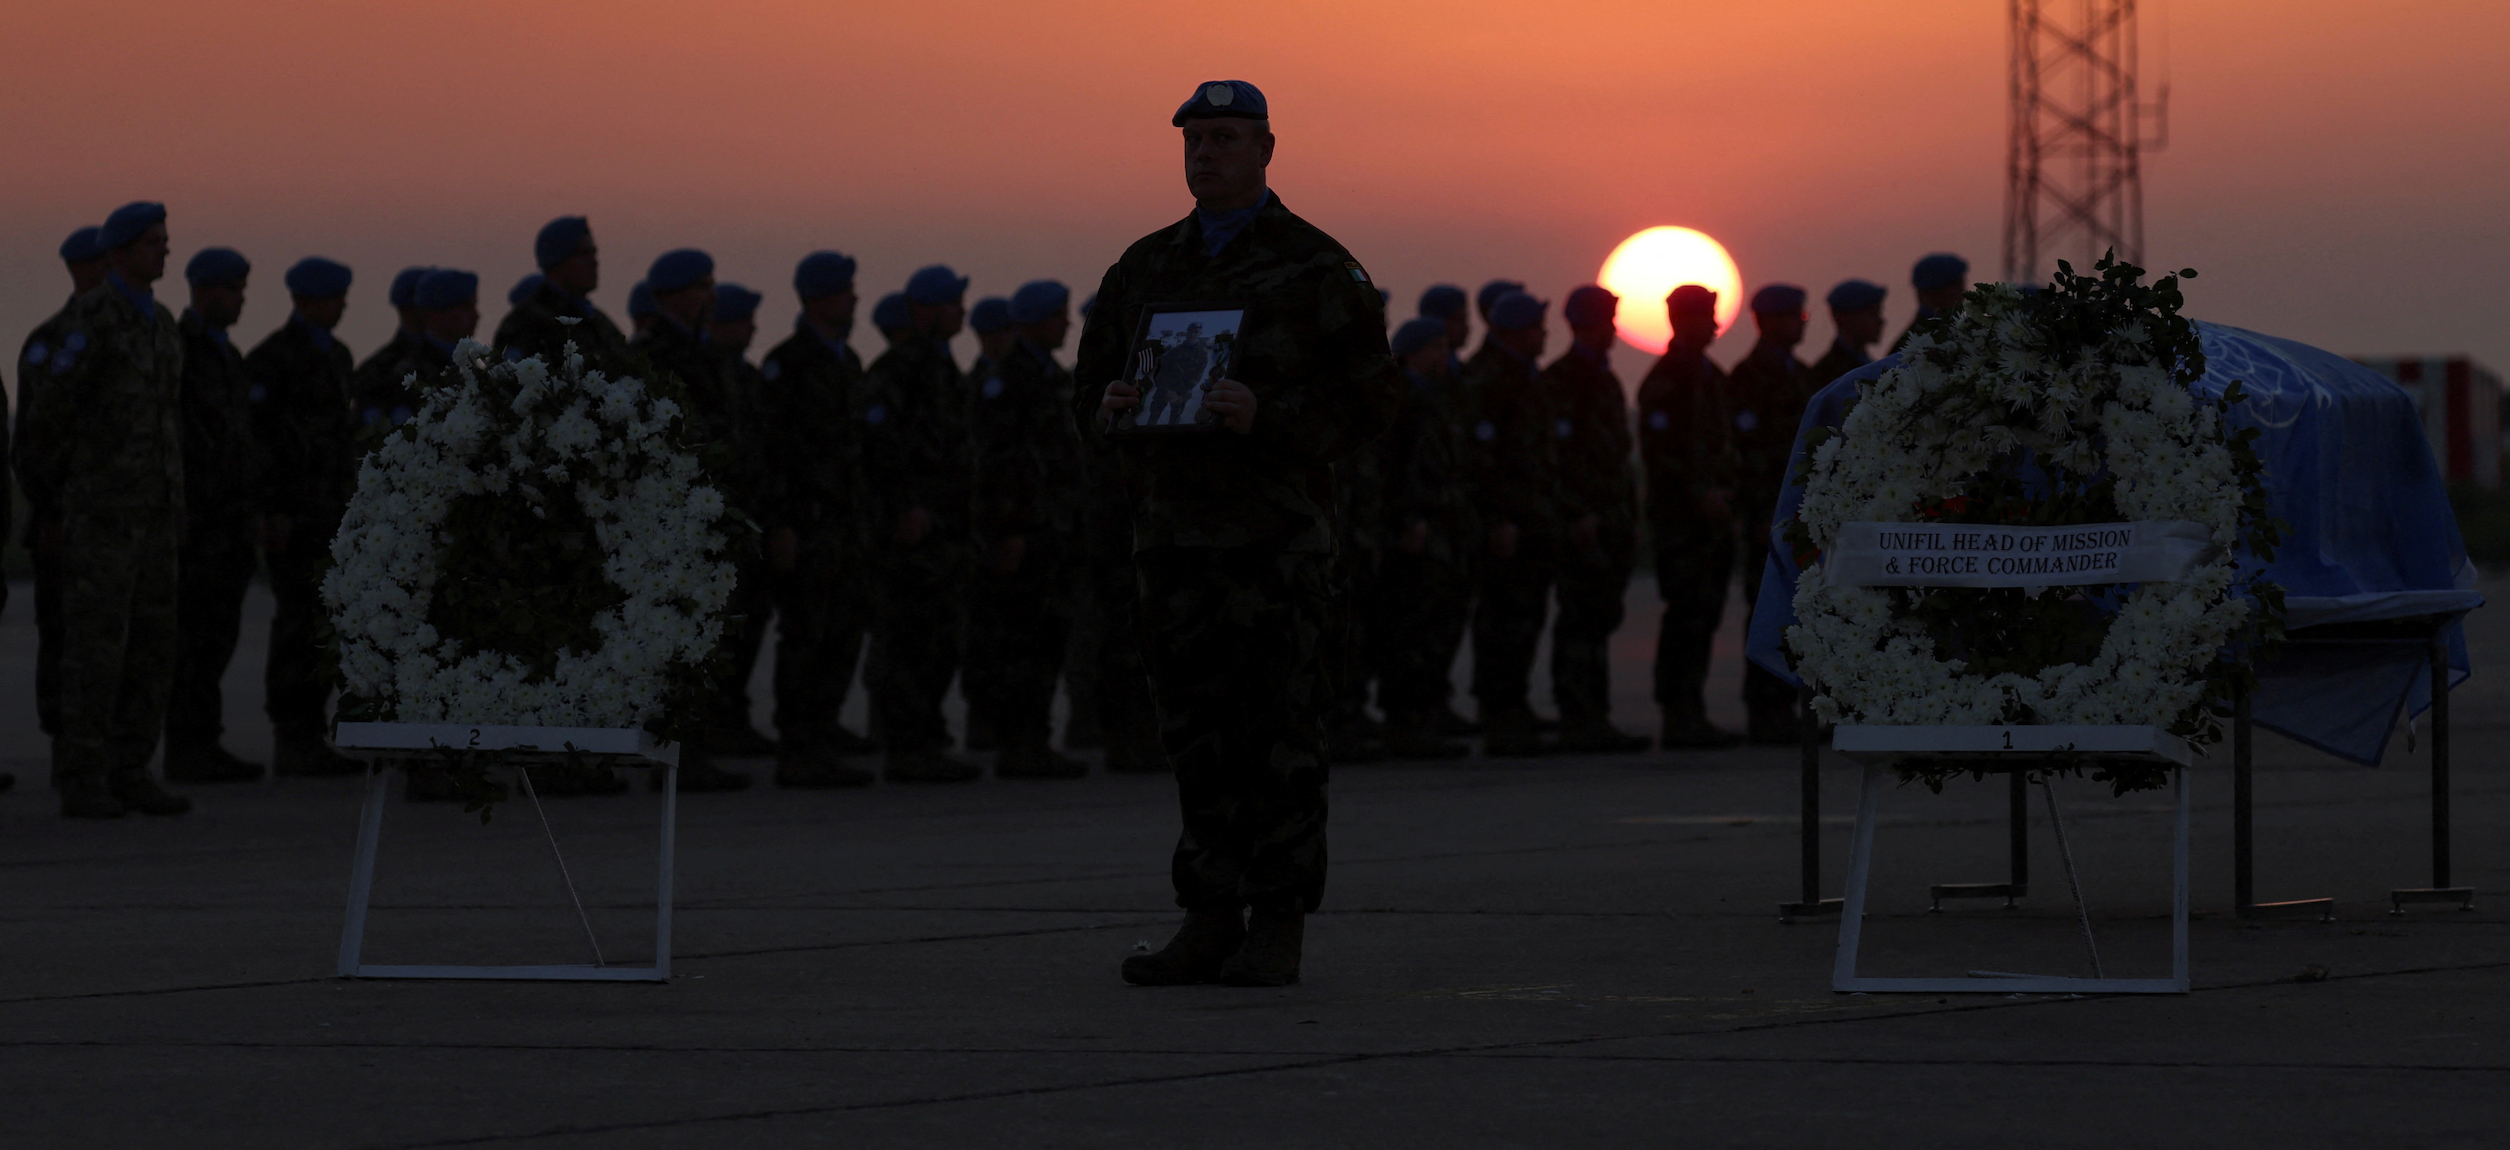 Members of the United Nations Interim Force in Lebanon (UNIFIL) peacekeeping mission attend the repatriation ceremony for Irish soldier Sean Rooney